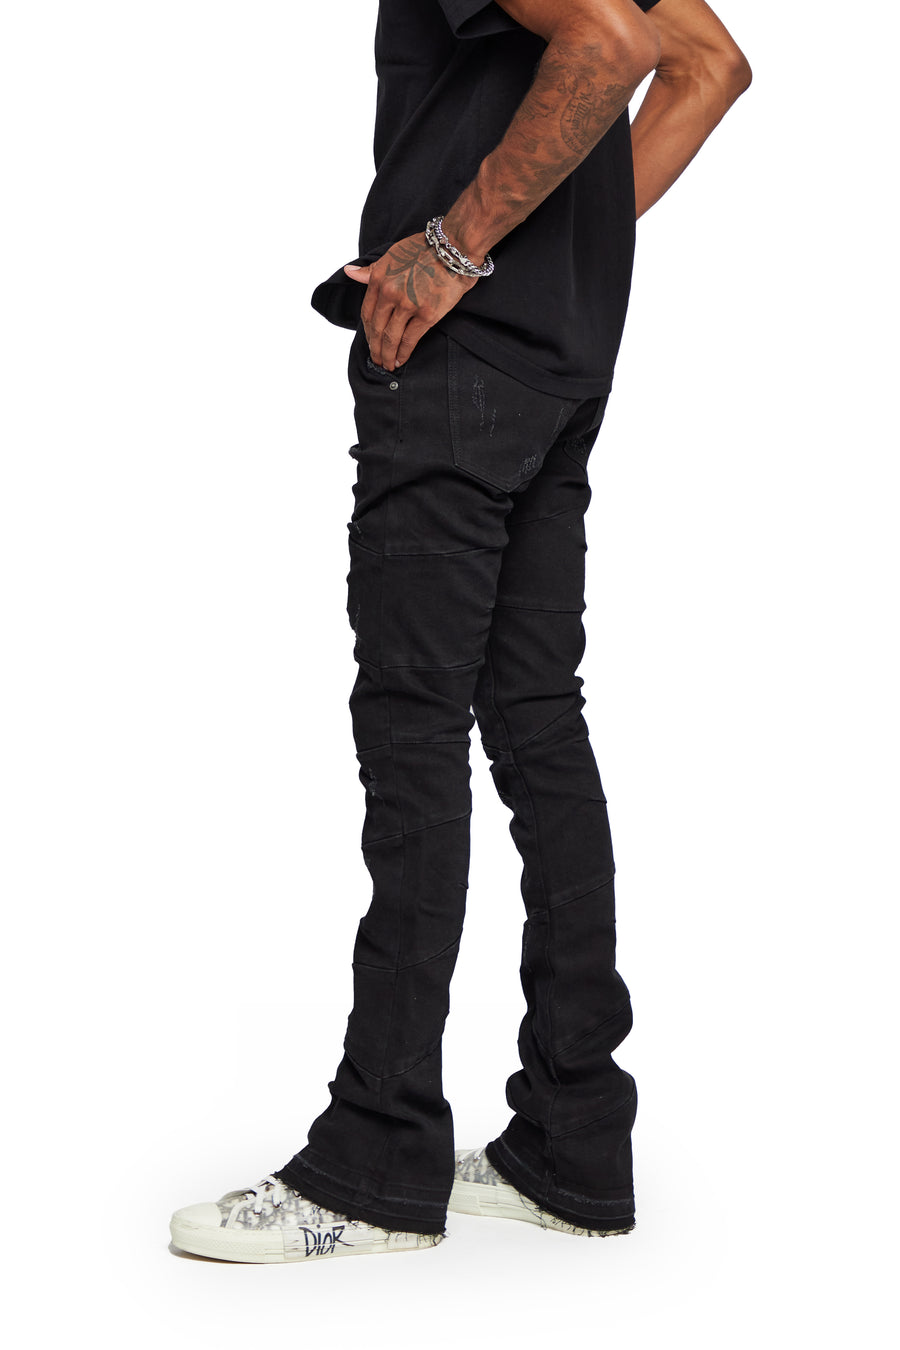 “WEST” BLACK STACKED FLARE JEAN